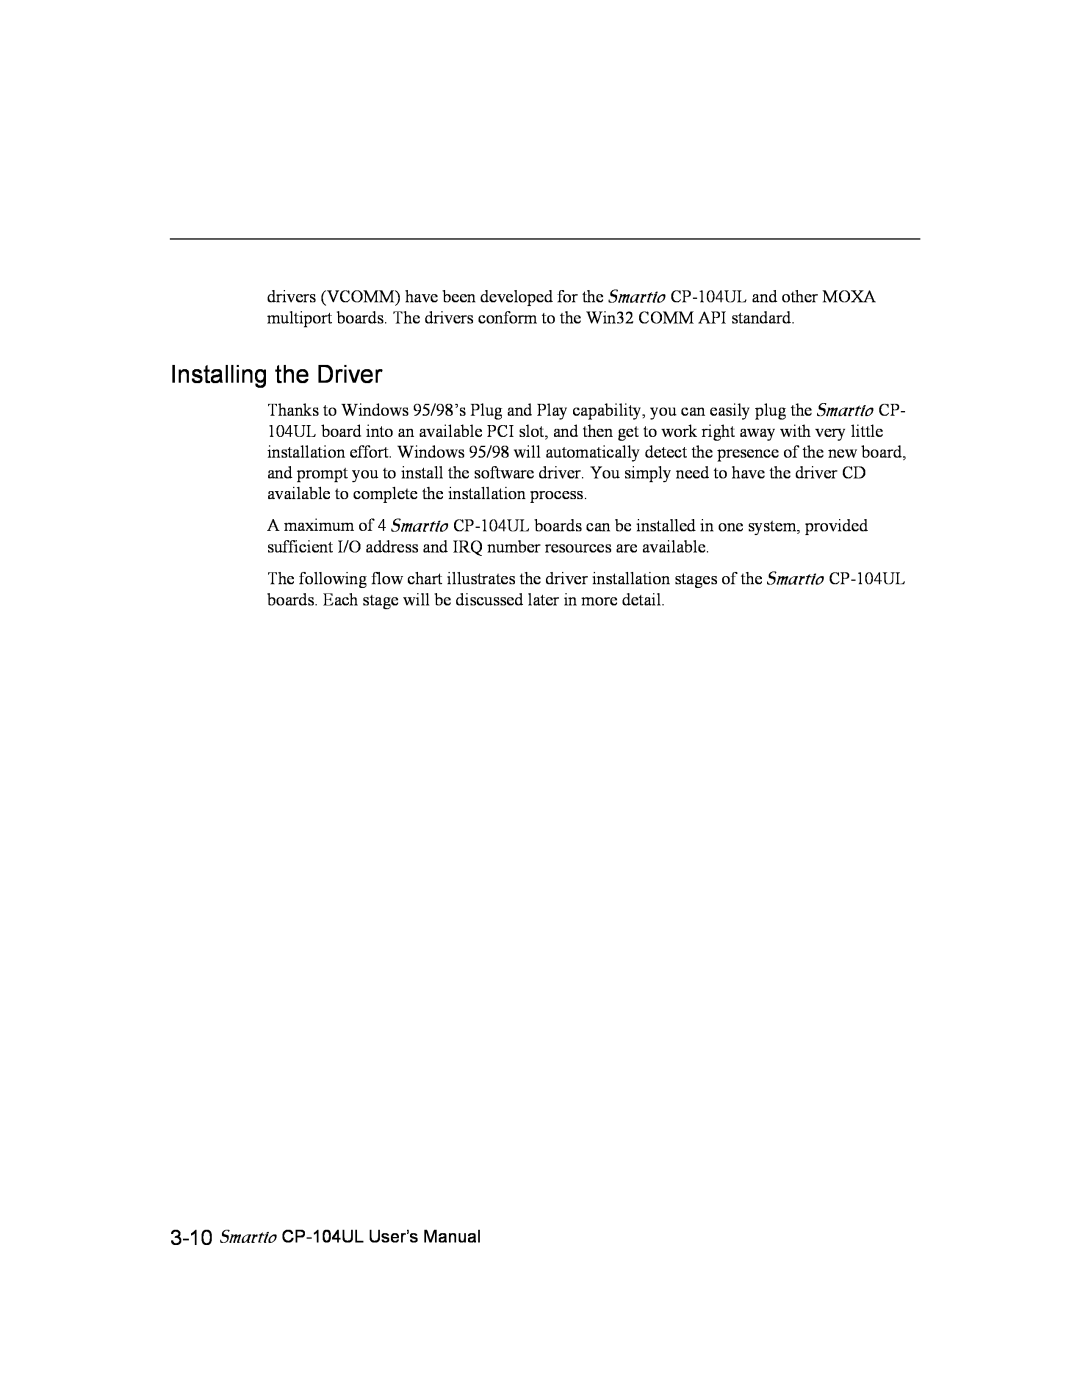 Moxa Technologies user manual Installing the Driver, Smartio CP-104UL User’s Manual 